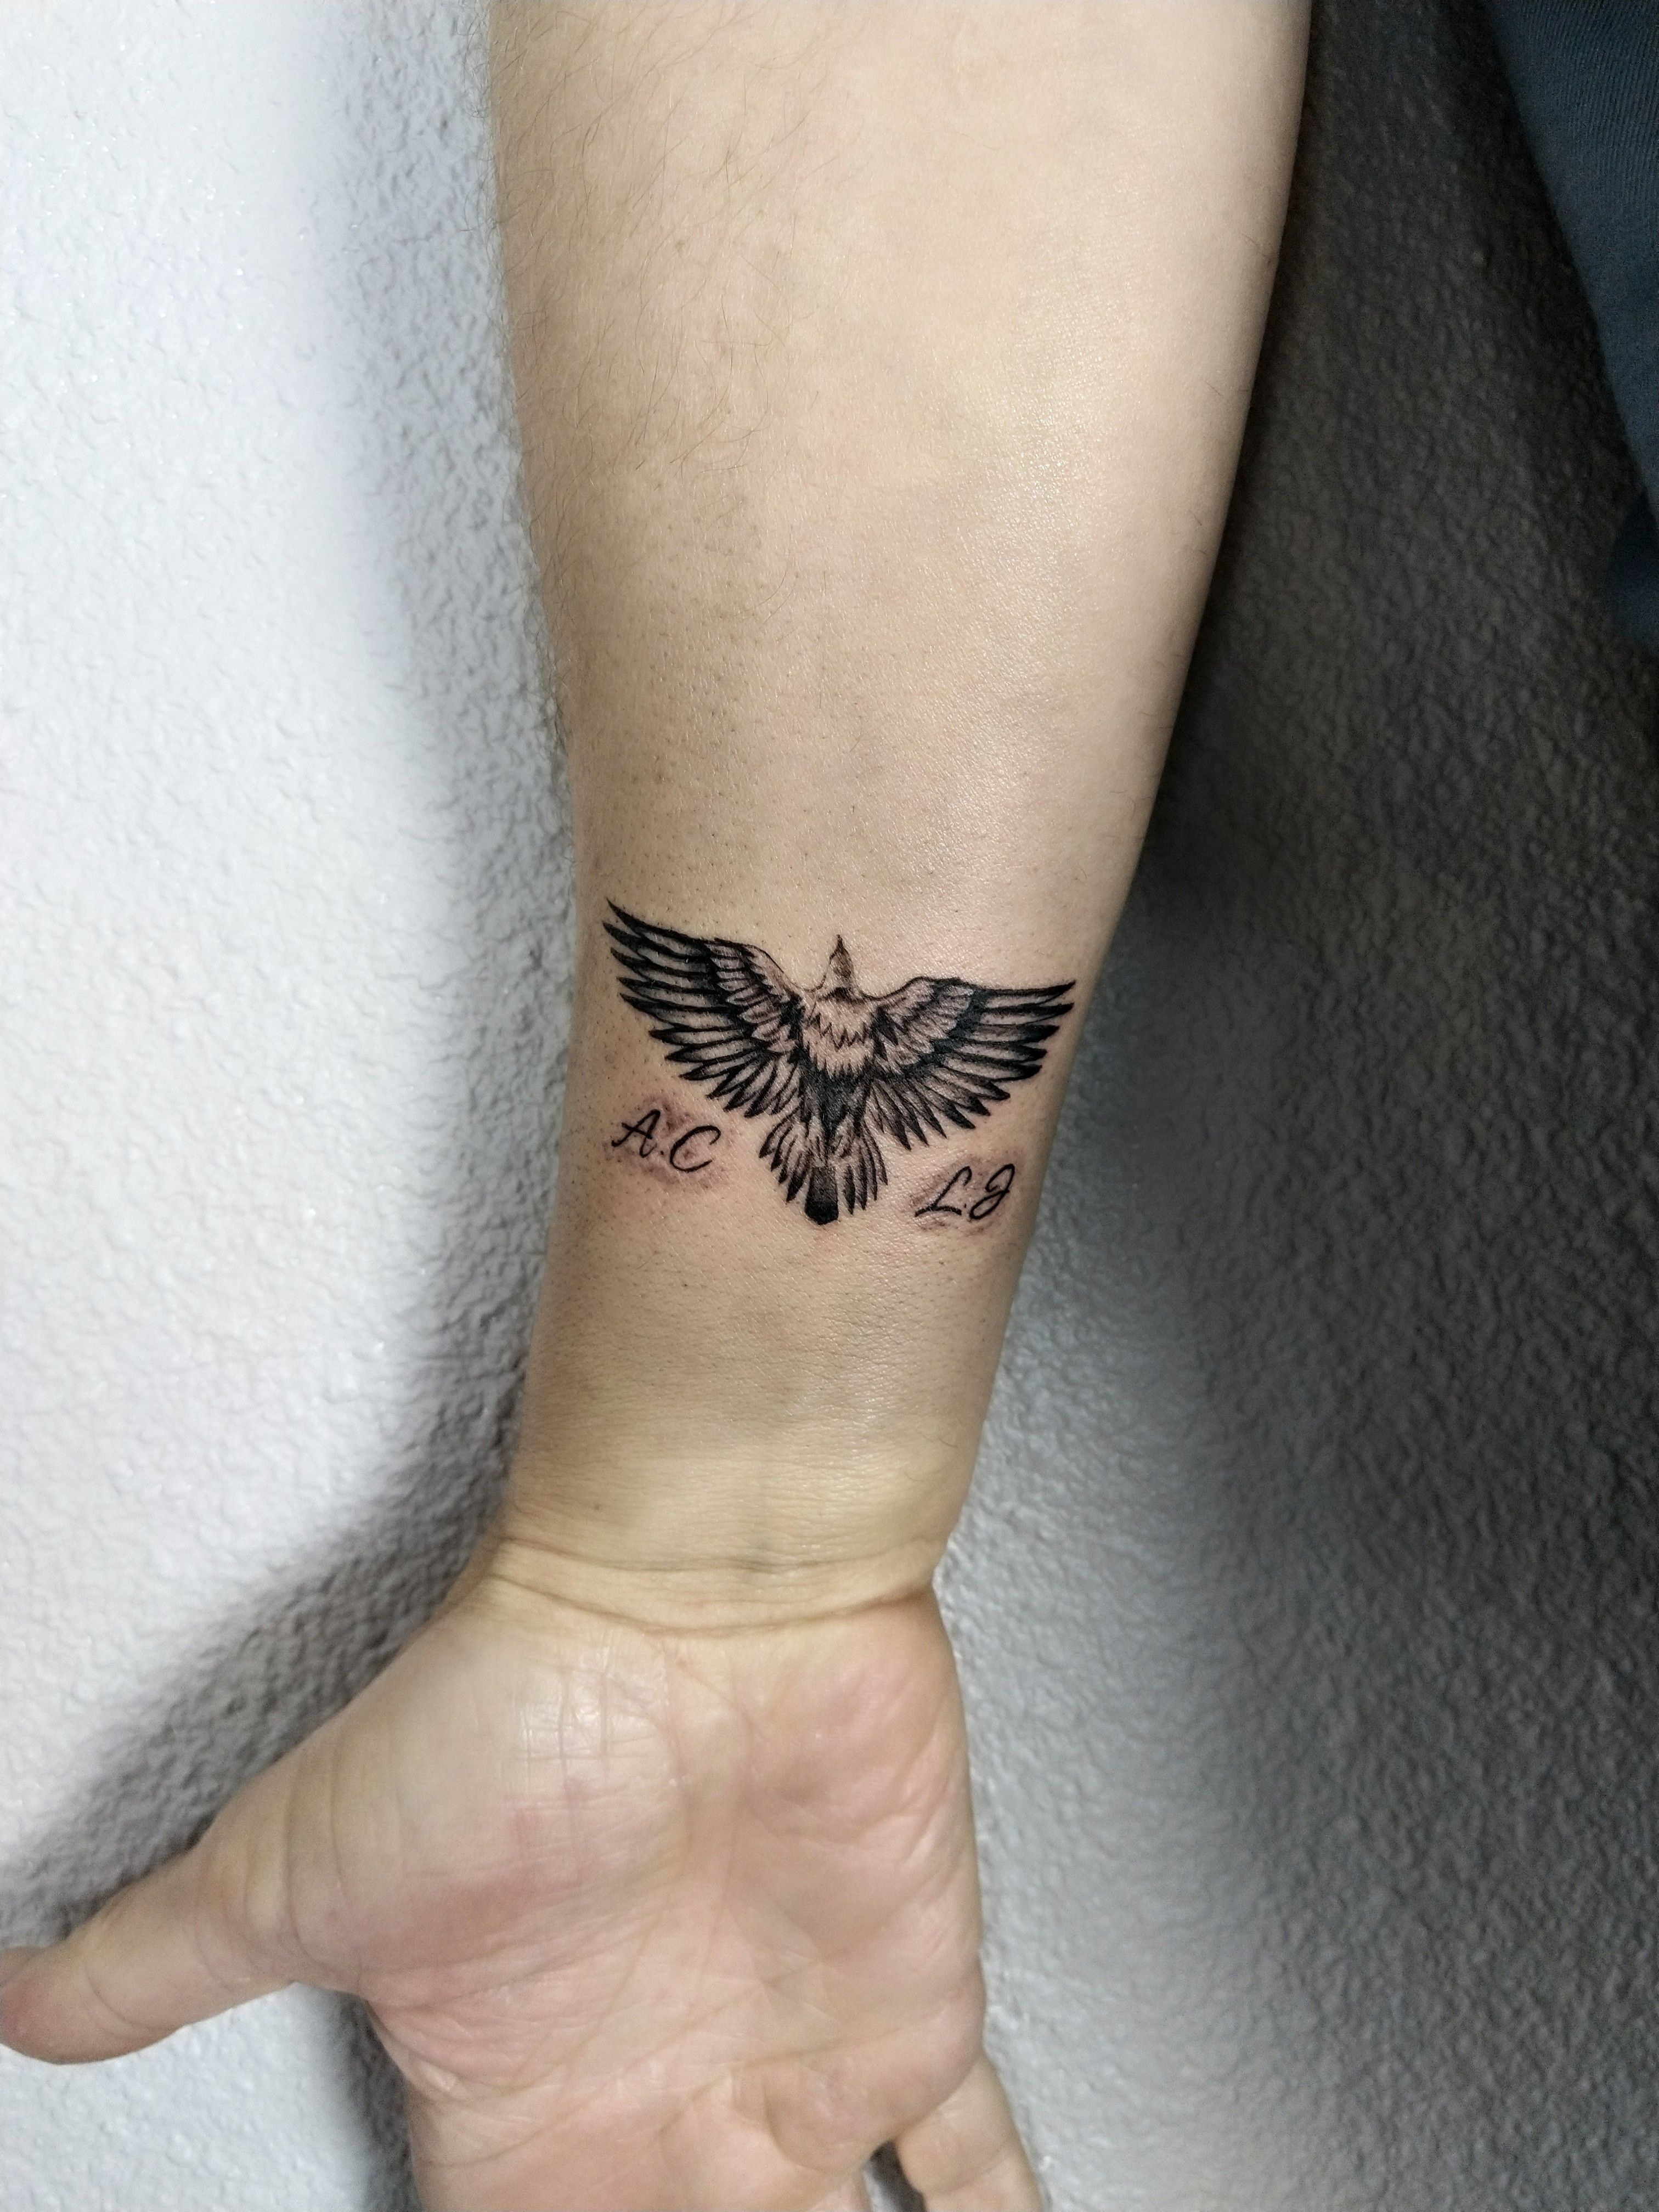 Of a Feather SemiPermanent Tattoo Lasts 12 weeks Painless and easy to  apply Organic ink Browse more or create your own  Inkbox   SemiPermanent Tattoos